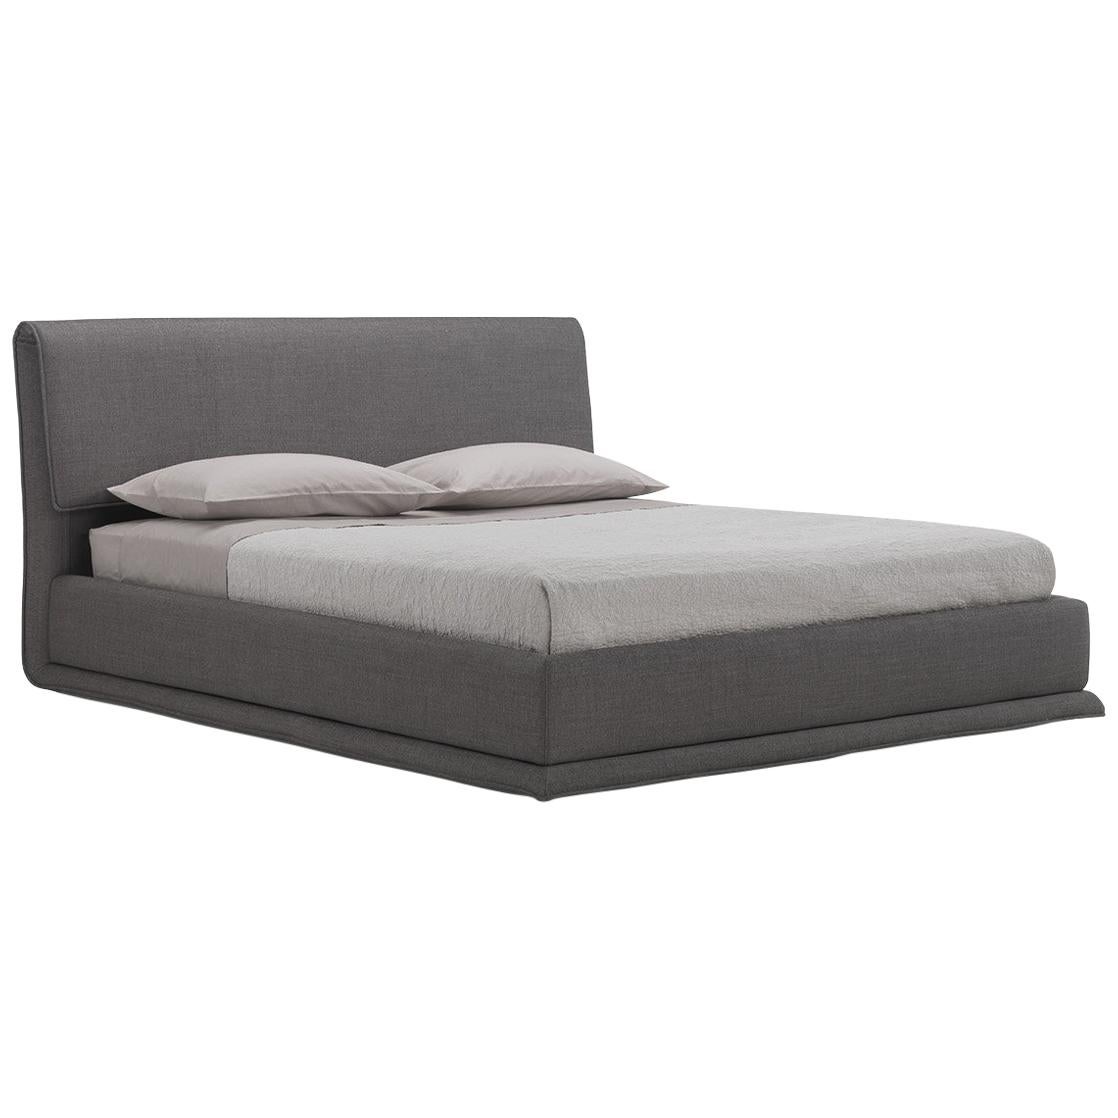 'VERZIERE' King Size Bed with Smoke Gray Upholstered Headboard and Bed Frame For Sale